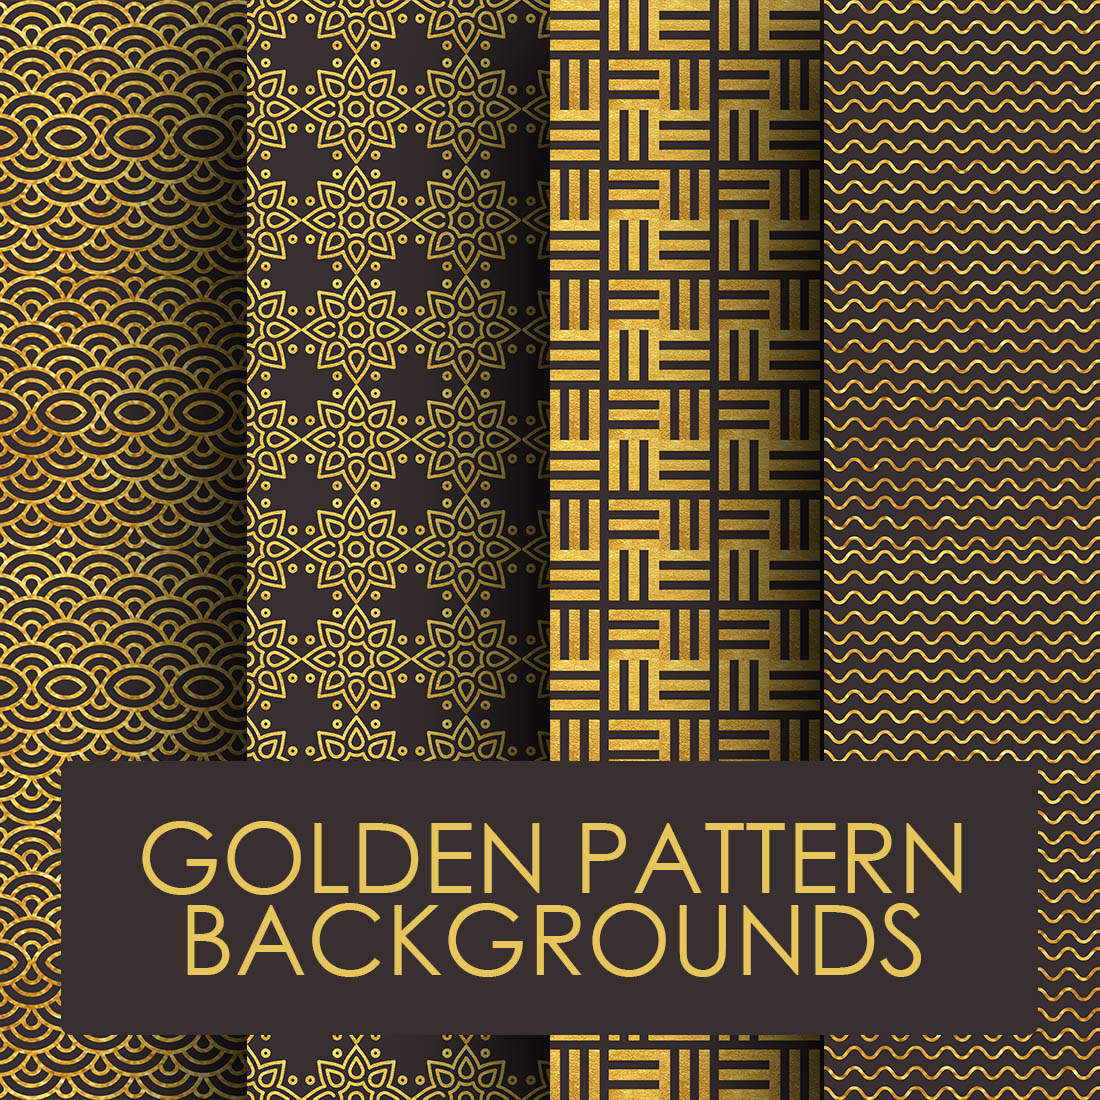 GOLDEN PATTERN DESIGNS FOR WALLPAPERS - POSTER BACKGROUND - TSHIRT PRINT DESIGN cover image.